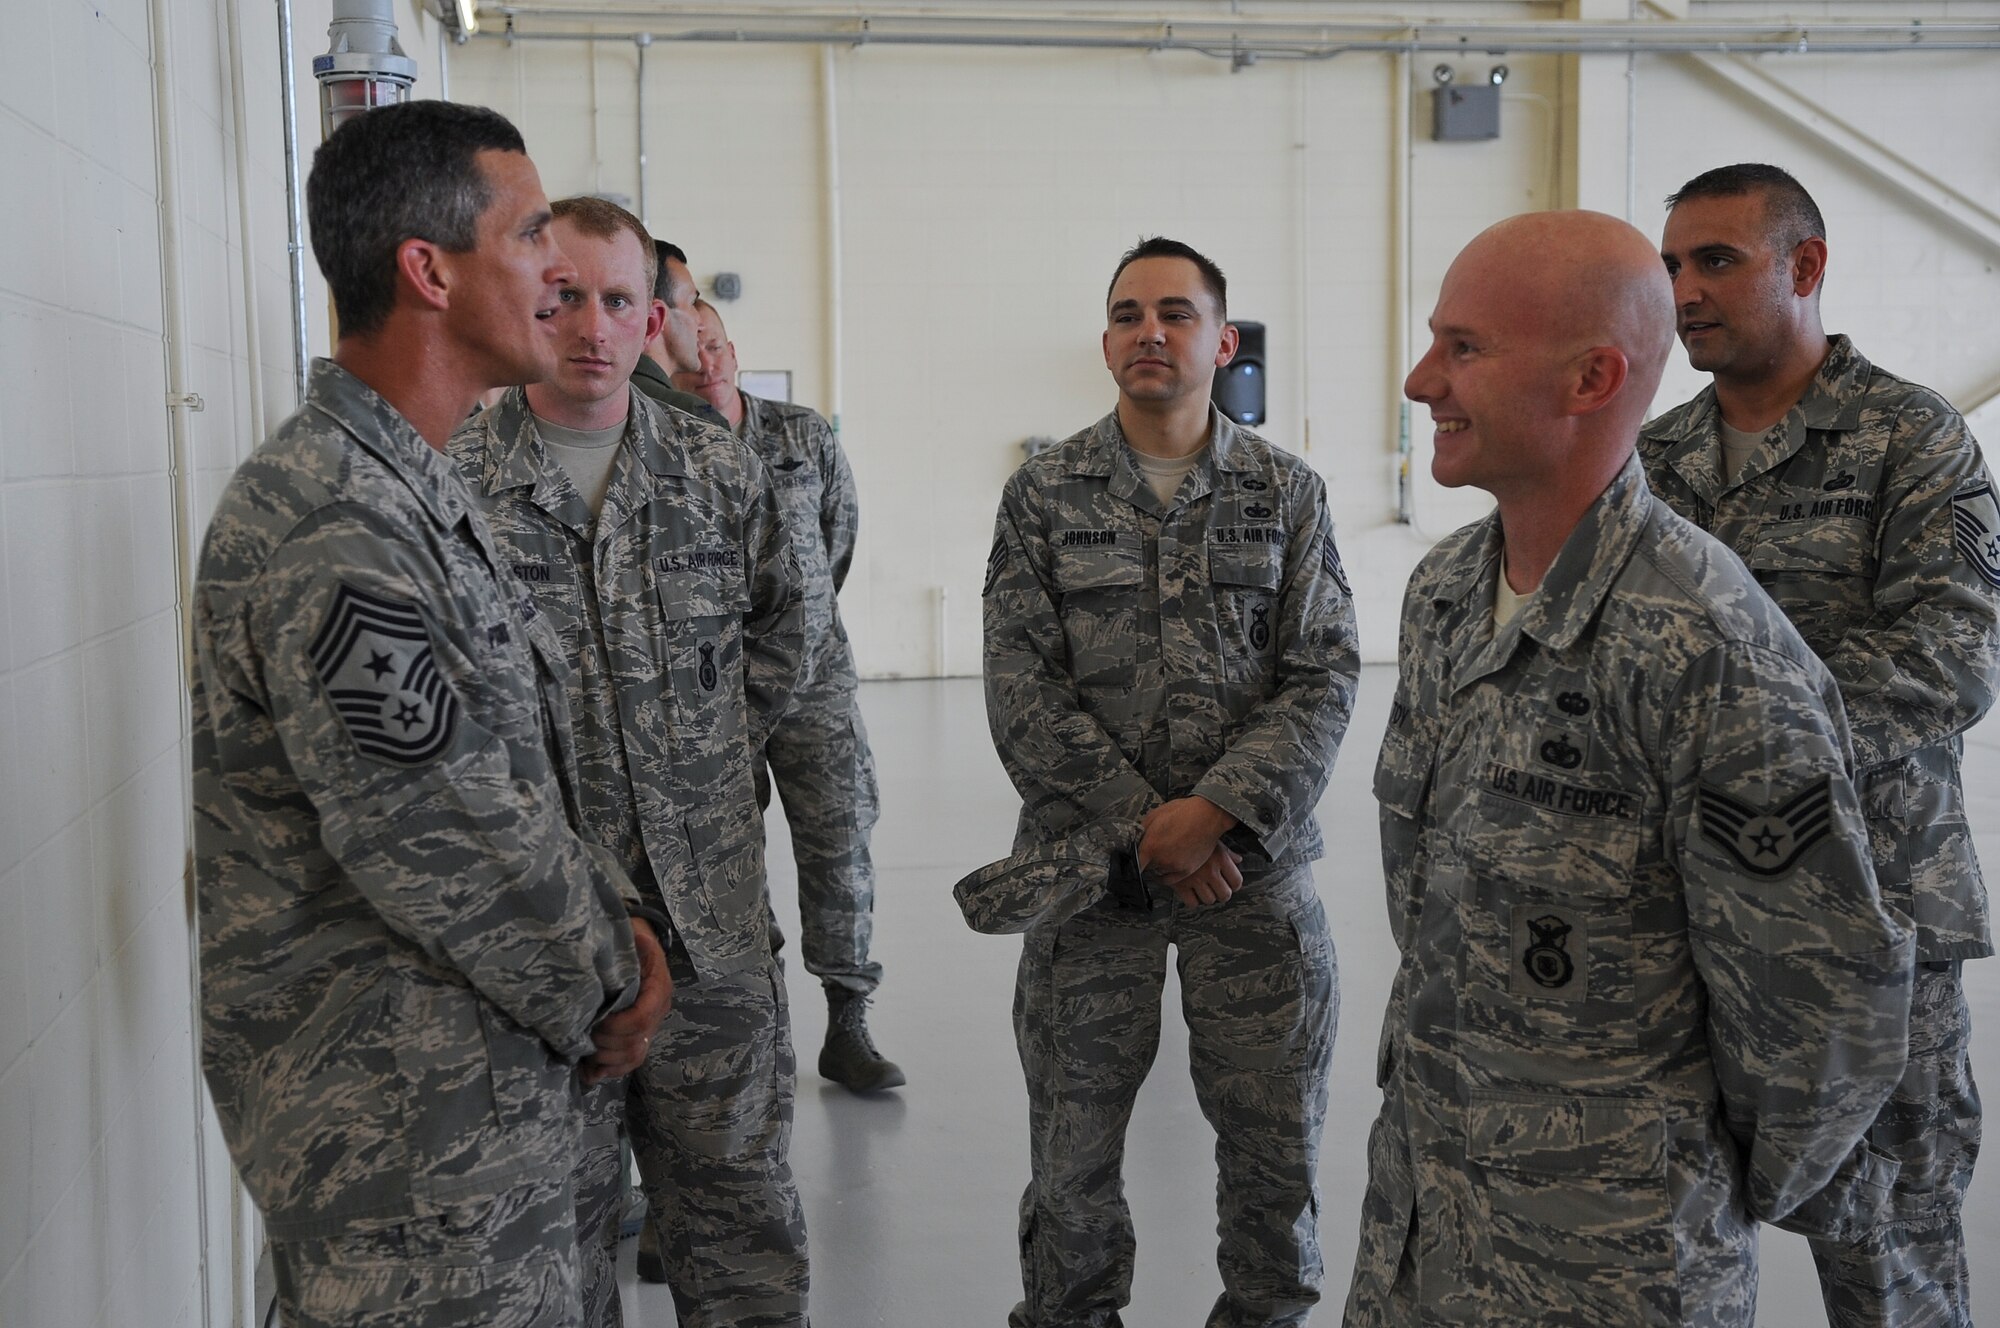 U.S. Air Force Chief Master Sgt. Rick Parsons, command chief of Air Combat Command, speaks to Staff Sgt. Richard Toy, 820th Base Defense Group, after an all-call held at Moody Air Force Base, Ga., Aug. 2, 2012. Parsons visited Moody to meet with Airmen and see improvements the base has made since his time as the 23d Wing command chief. (U.S. Air Force photo by Airman 1st Class Olivia Dominique/Released)